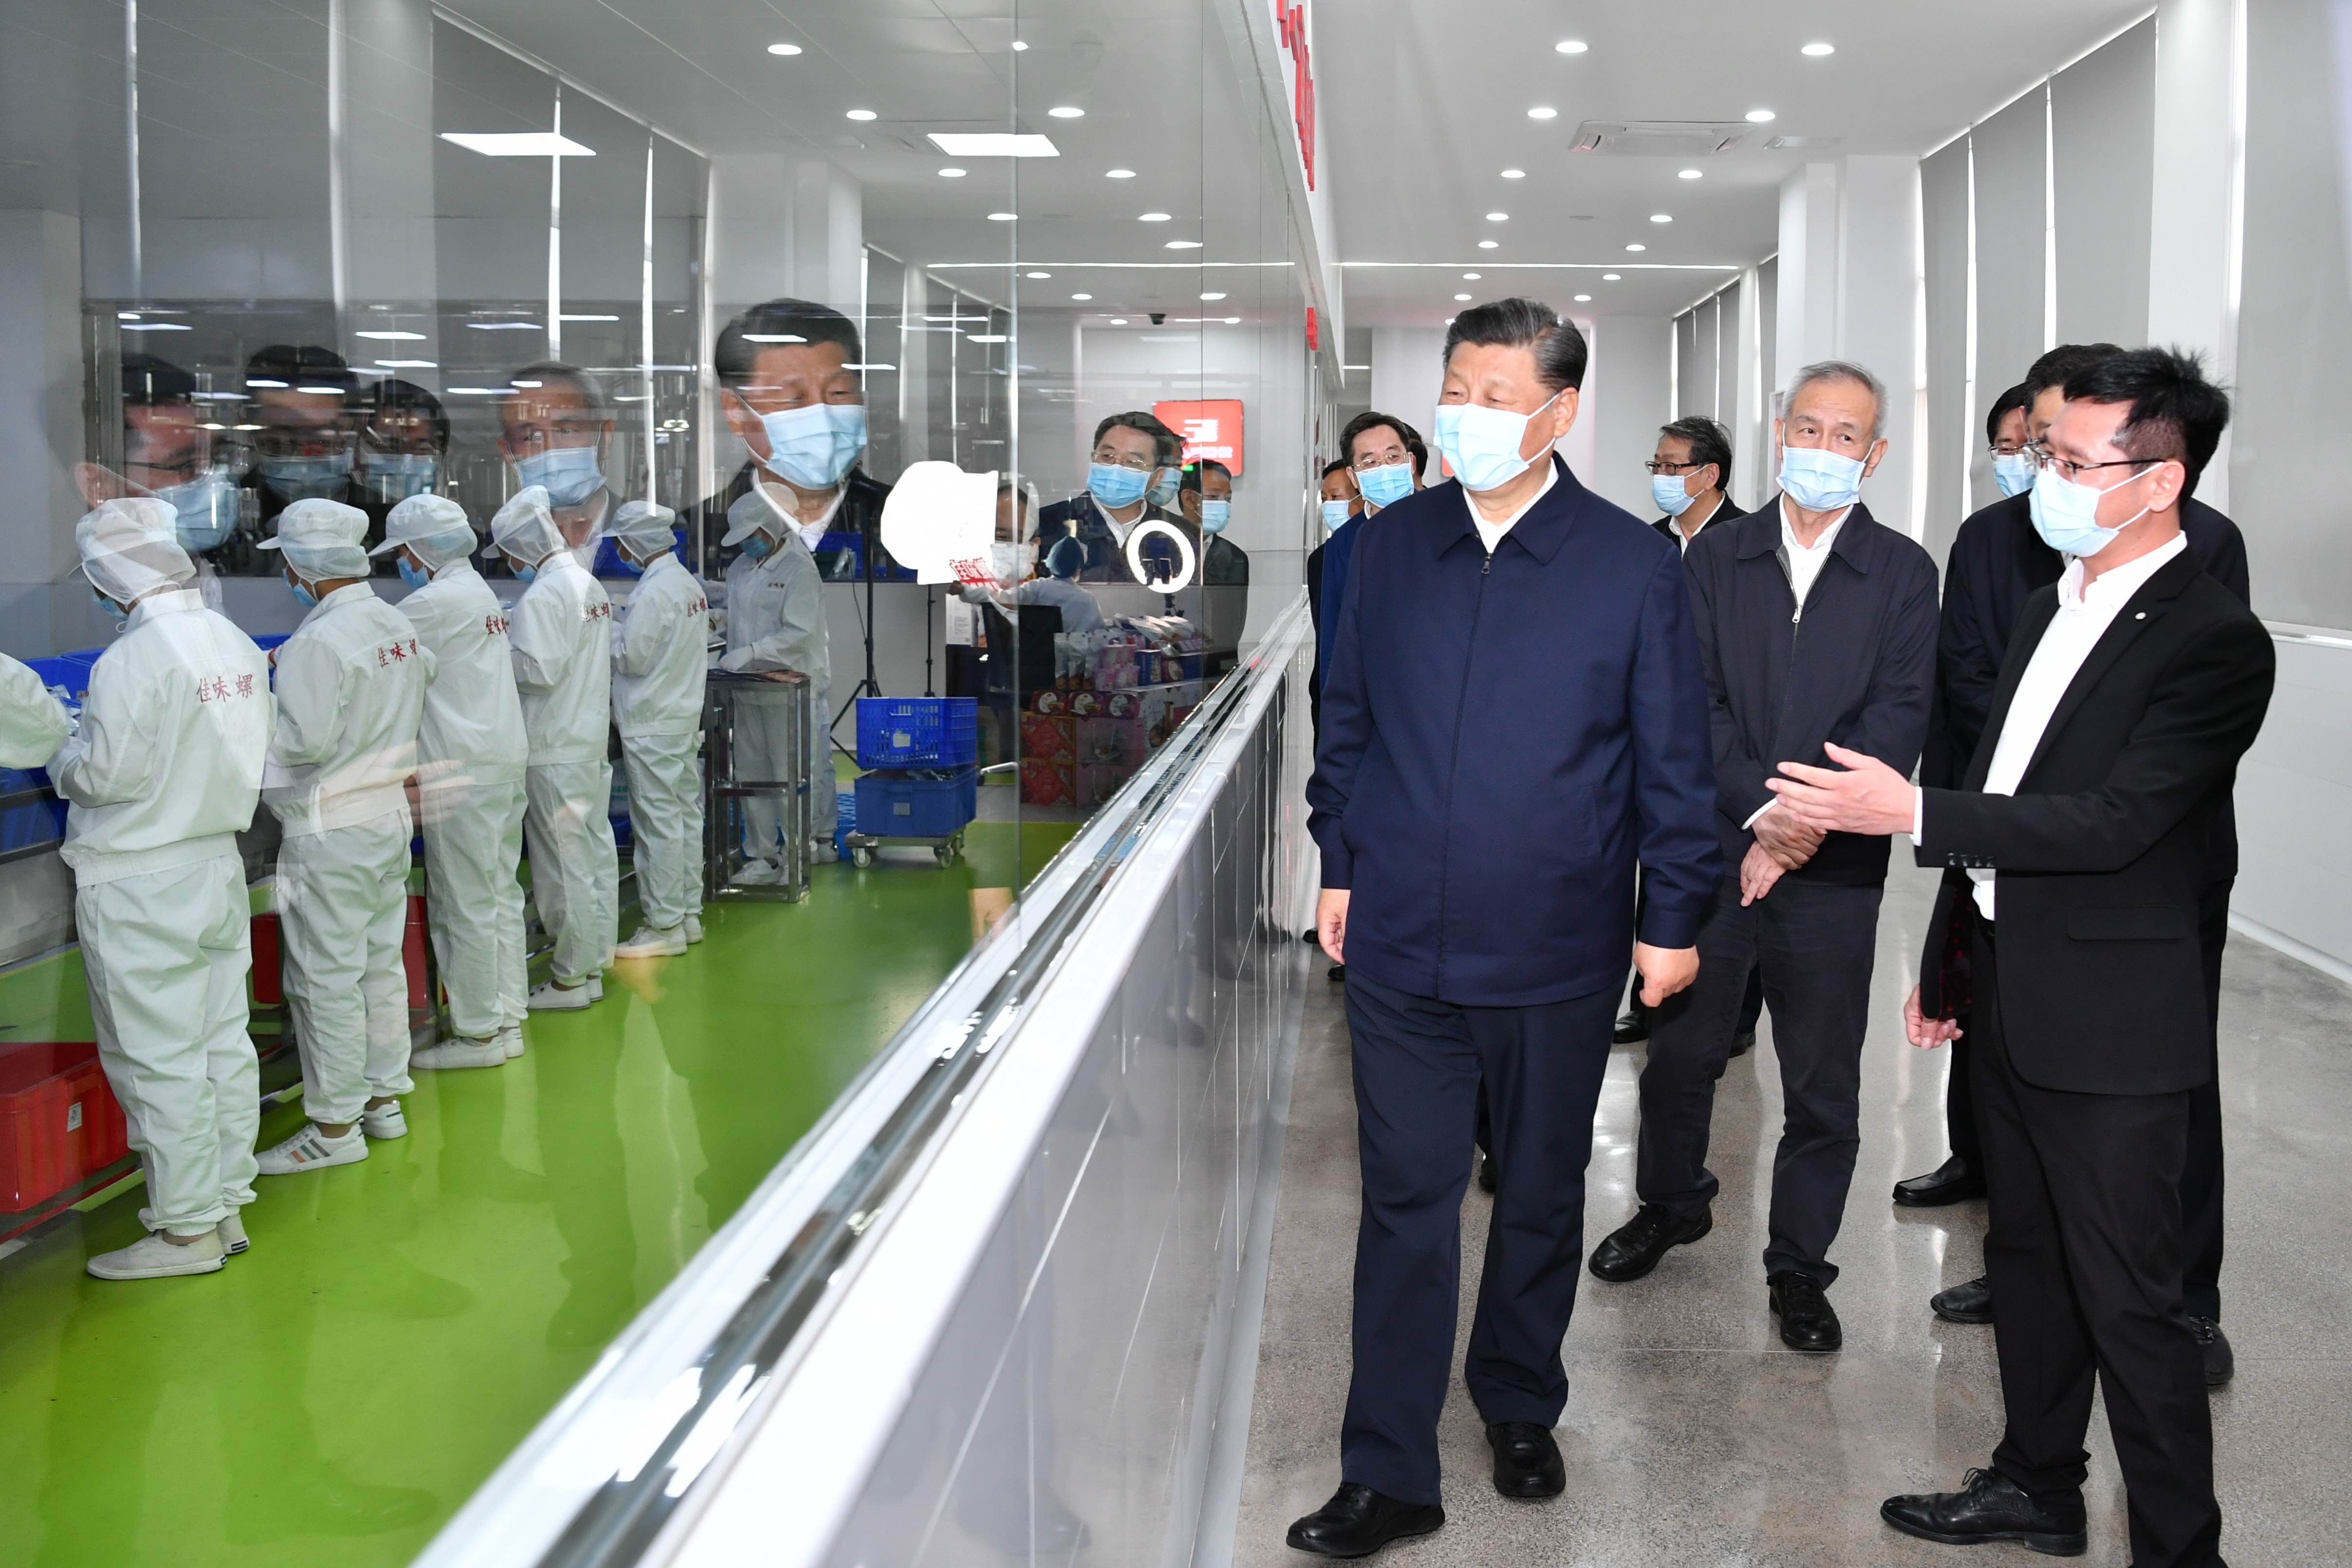 President Xi Jinping visits a food-processing facility for rice noodles in Liuzhou, Guangxi, this week. Photo: Xinhua